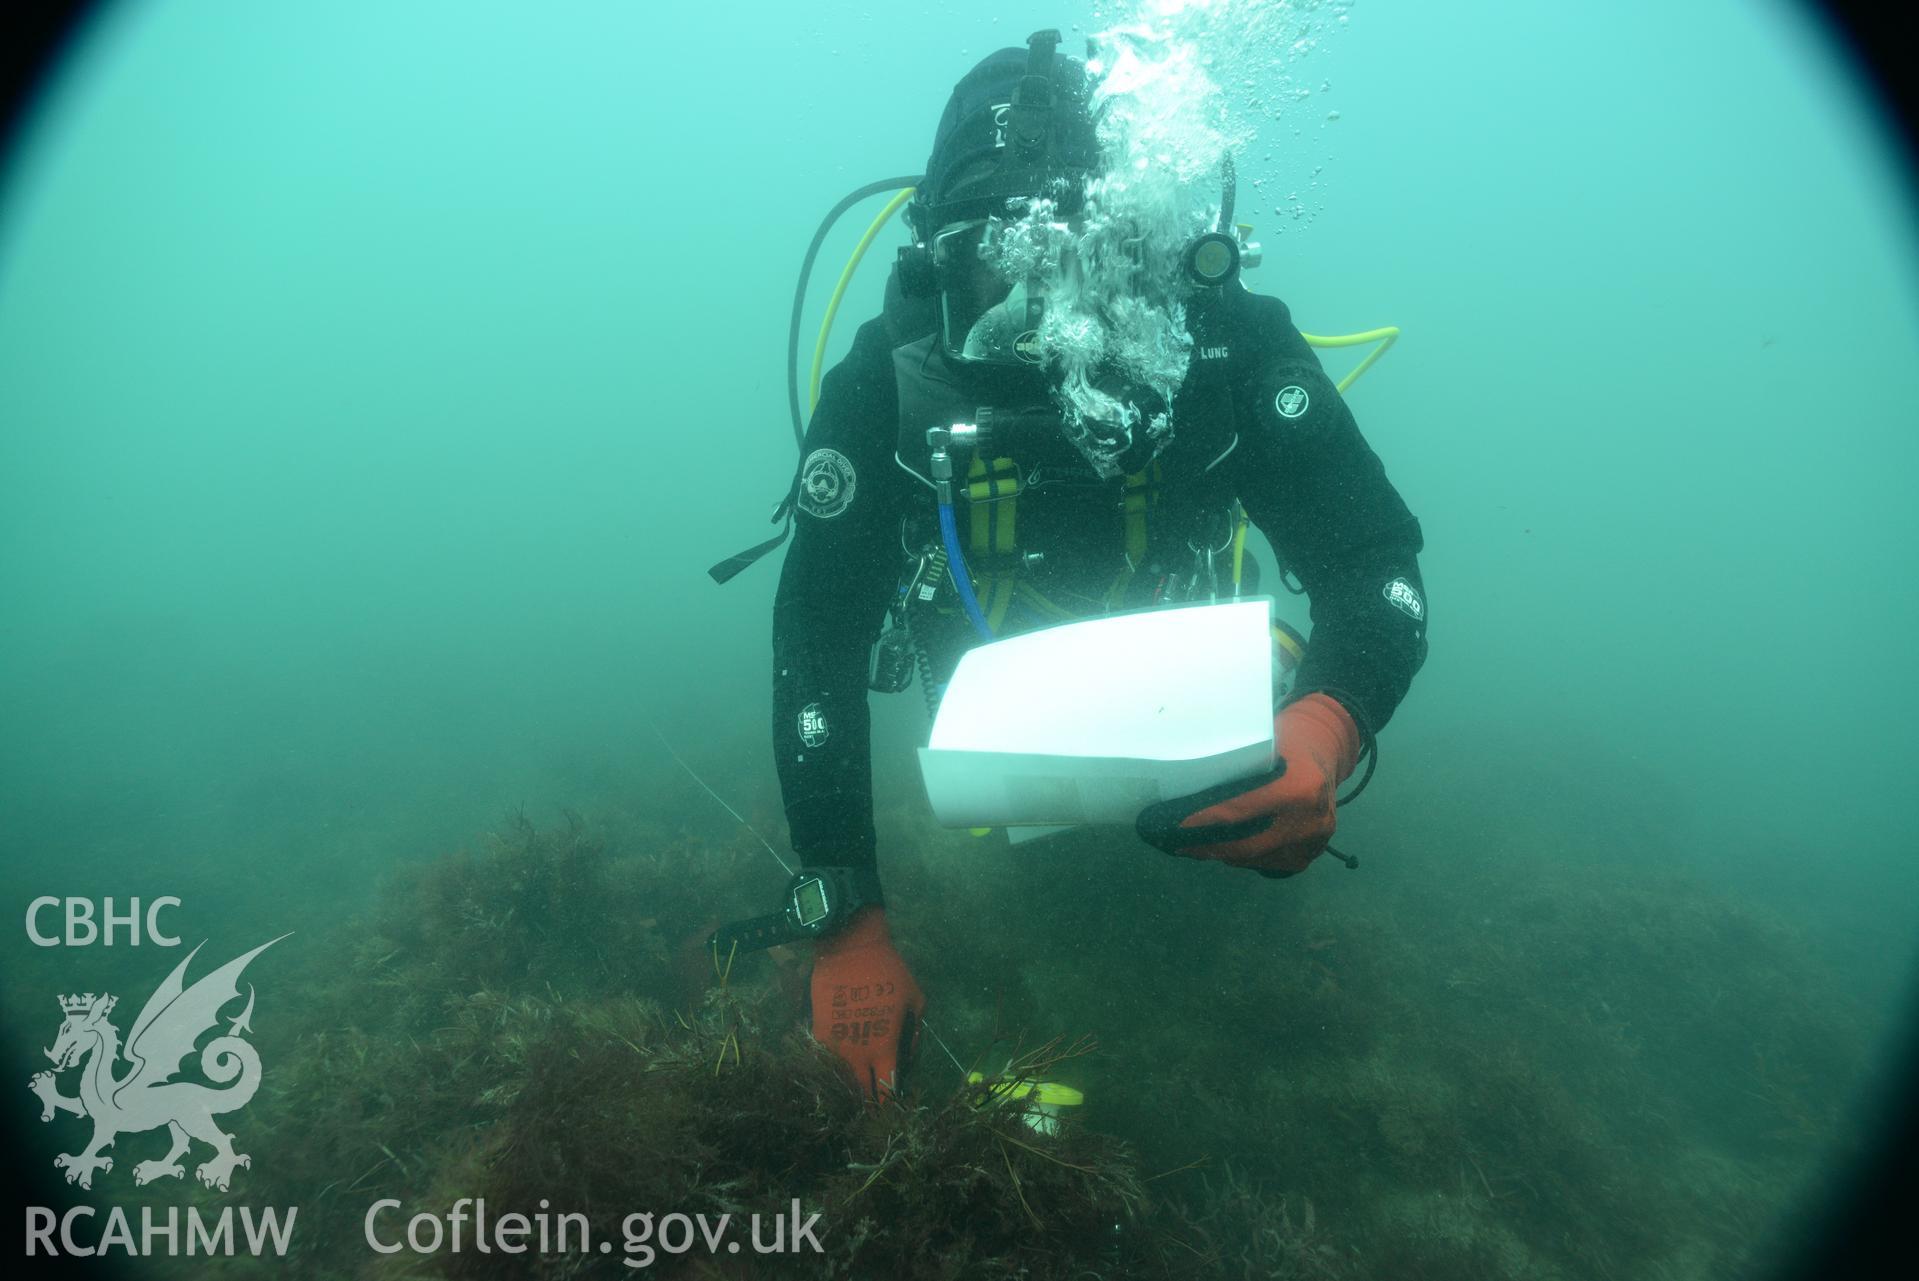 Diver working on survey of the Bronze Bell wreck, Tal-y-Bont. Undertaken by MSDS Marine on behalf of RCAHMW, through the EU Funded CHERISH Project.